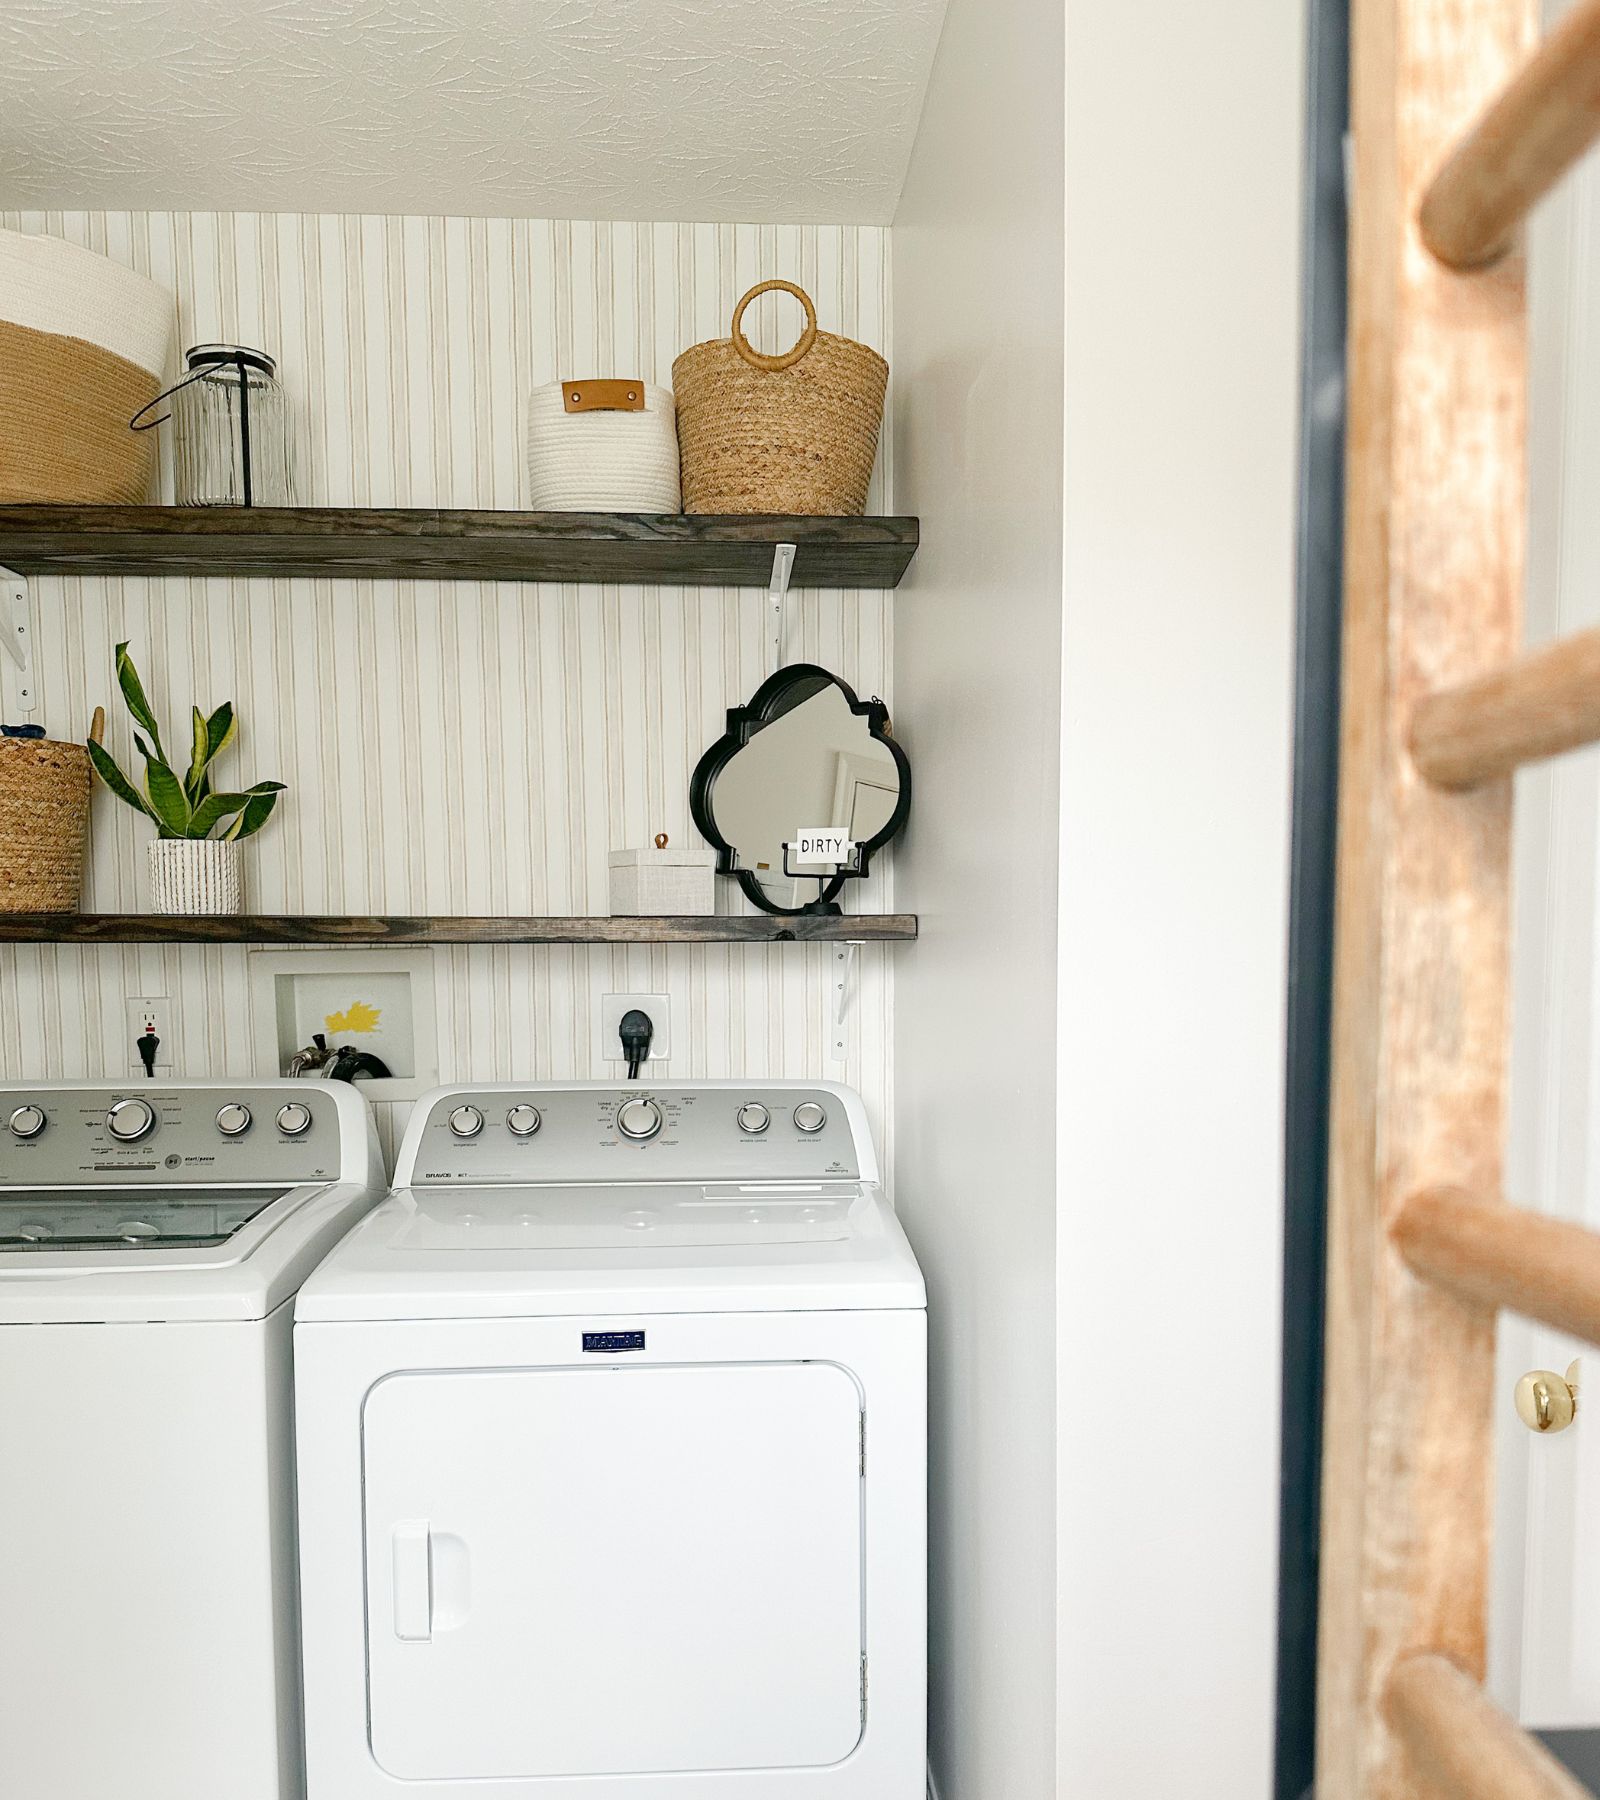 11 Very Small Laundry Room Ideas That Will Actually Make You Want To Do Laundry Home By Alley 7985